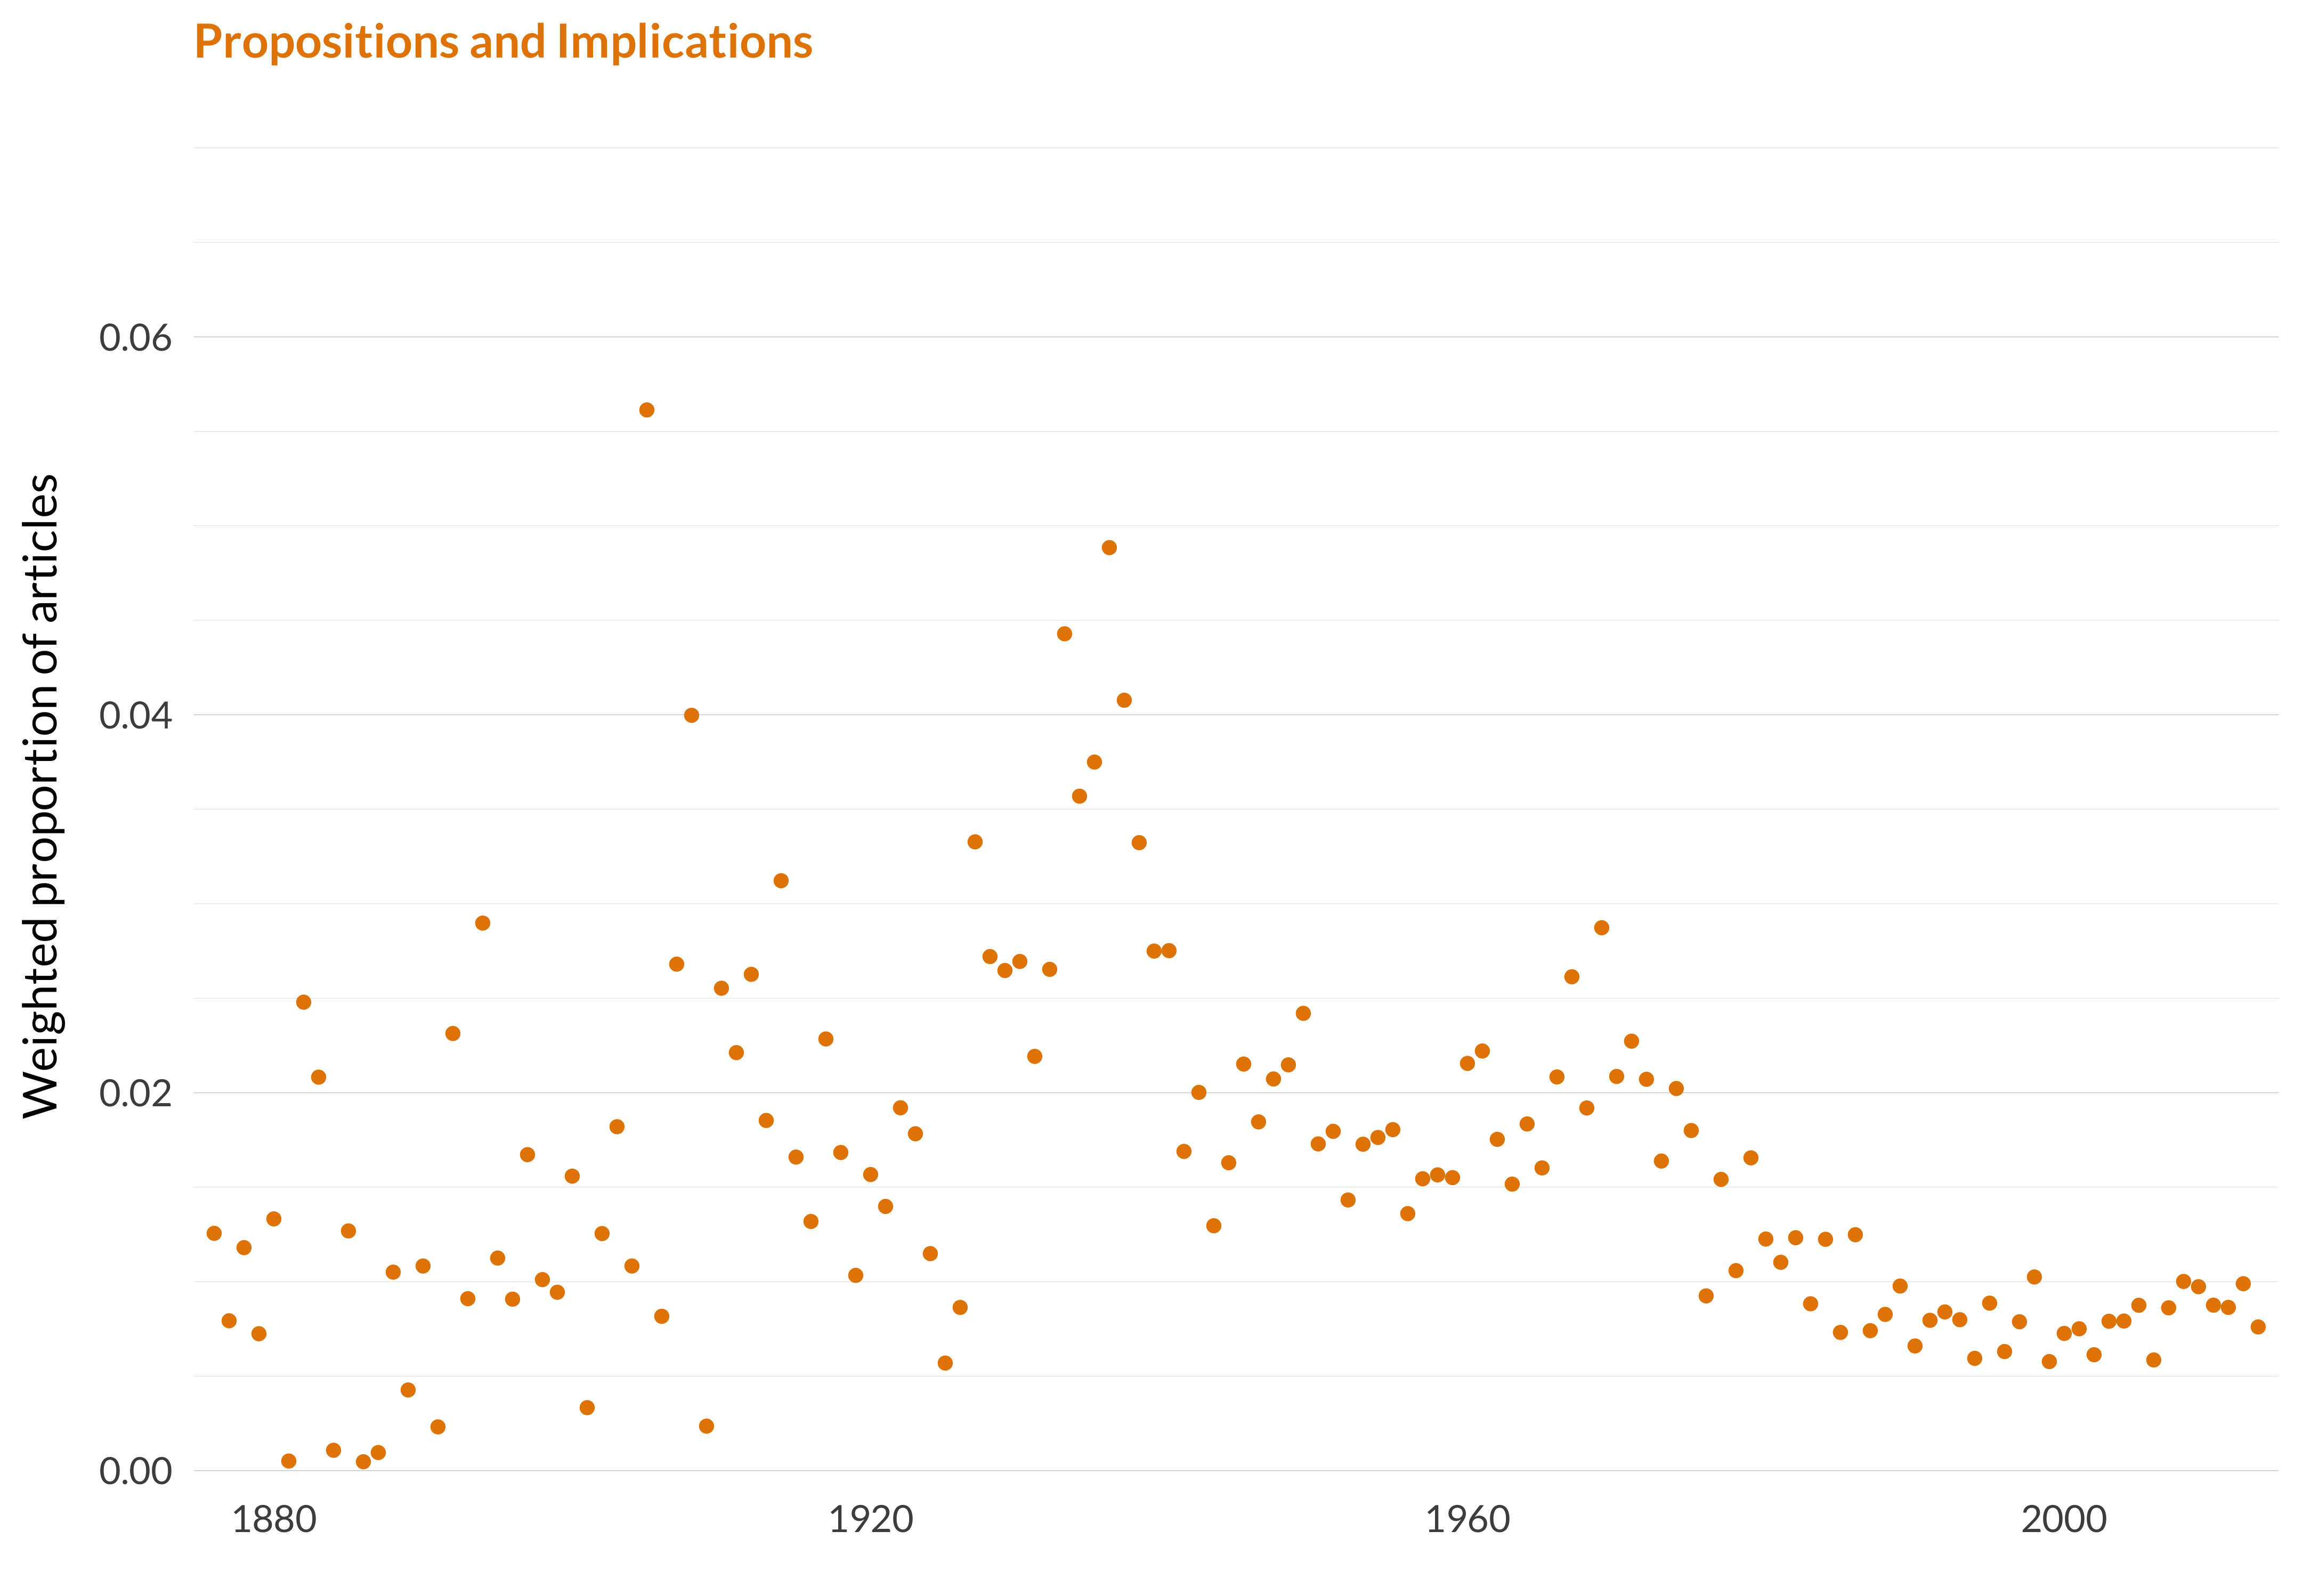 A scatterplot showing which proportion of articles each year are in the propositions and implicationstopic. The x-axis shows the year, the y-axis measures the proportion of articles each year in this topic. There is one dot per year. The highest value is in 1905 when 5.6% of articles were in this topic. The lowest value is in 1886 when 0.0% of articles were in this topic. The full table that provides the data for this graph is available in Table A.7 in Appendix A.